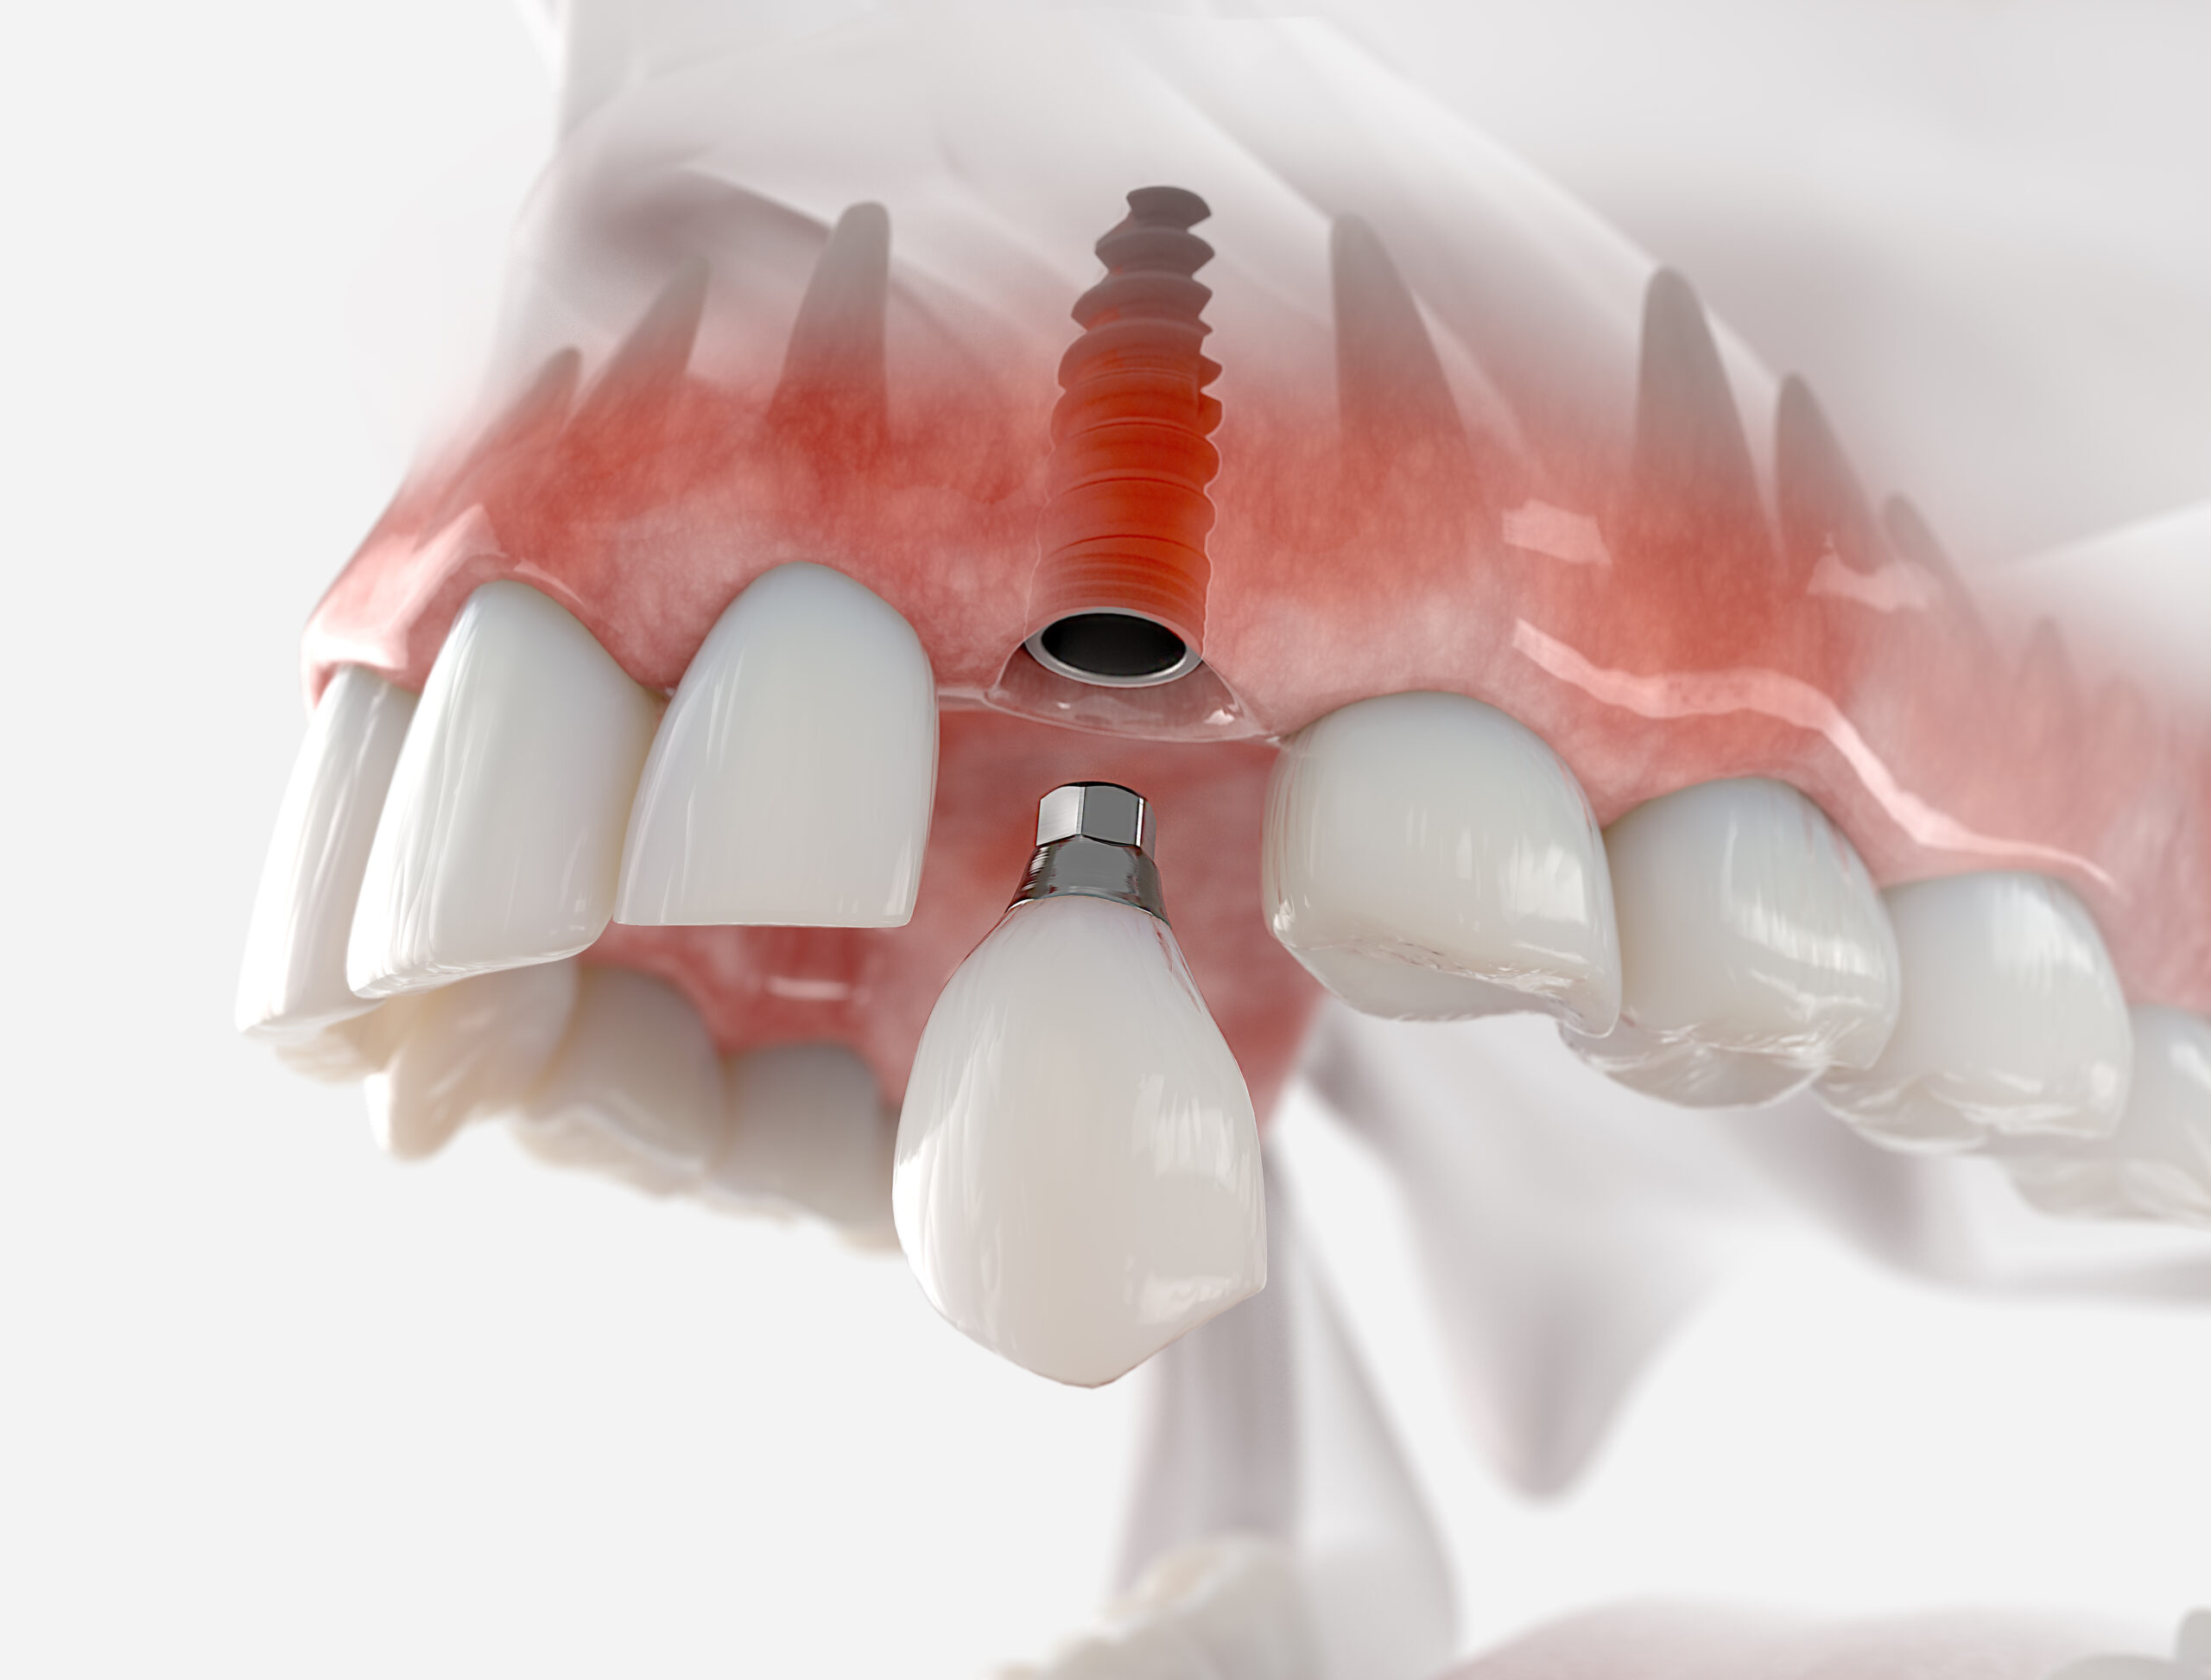 Replacement of maxillary canine with a dental implant. Realistic 3d illustration.